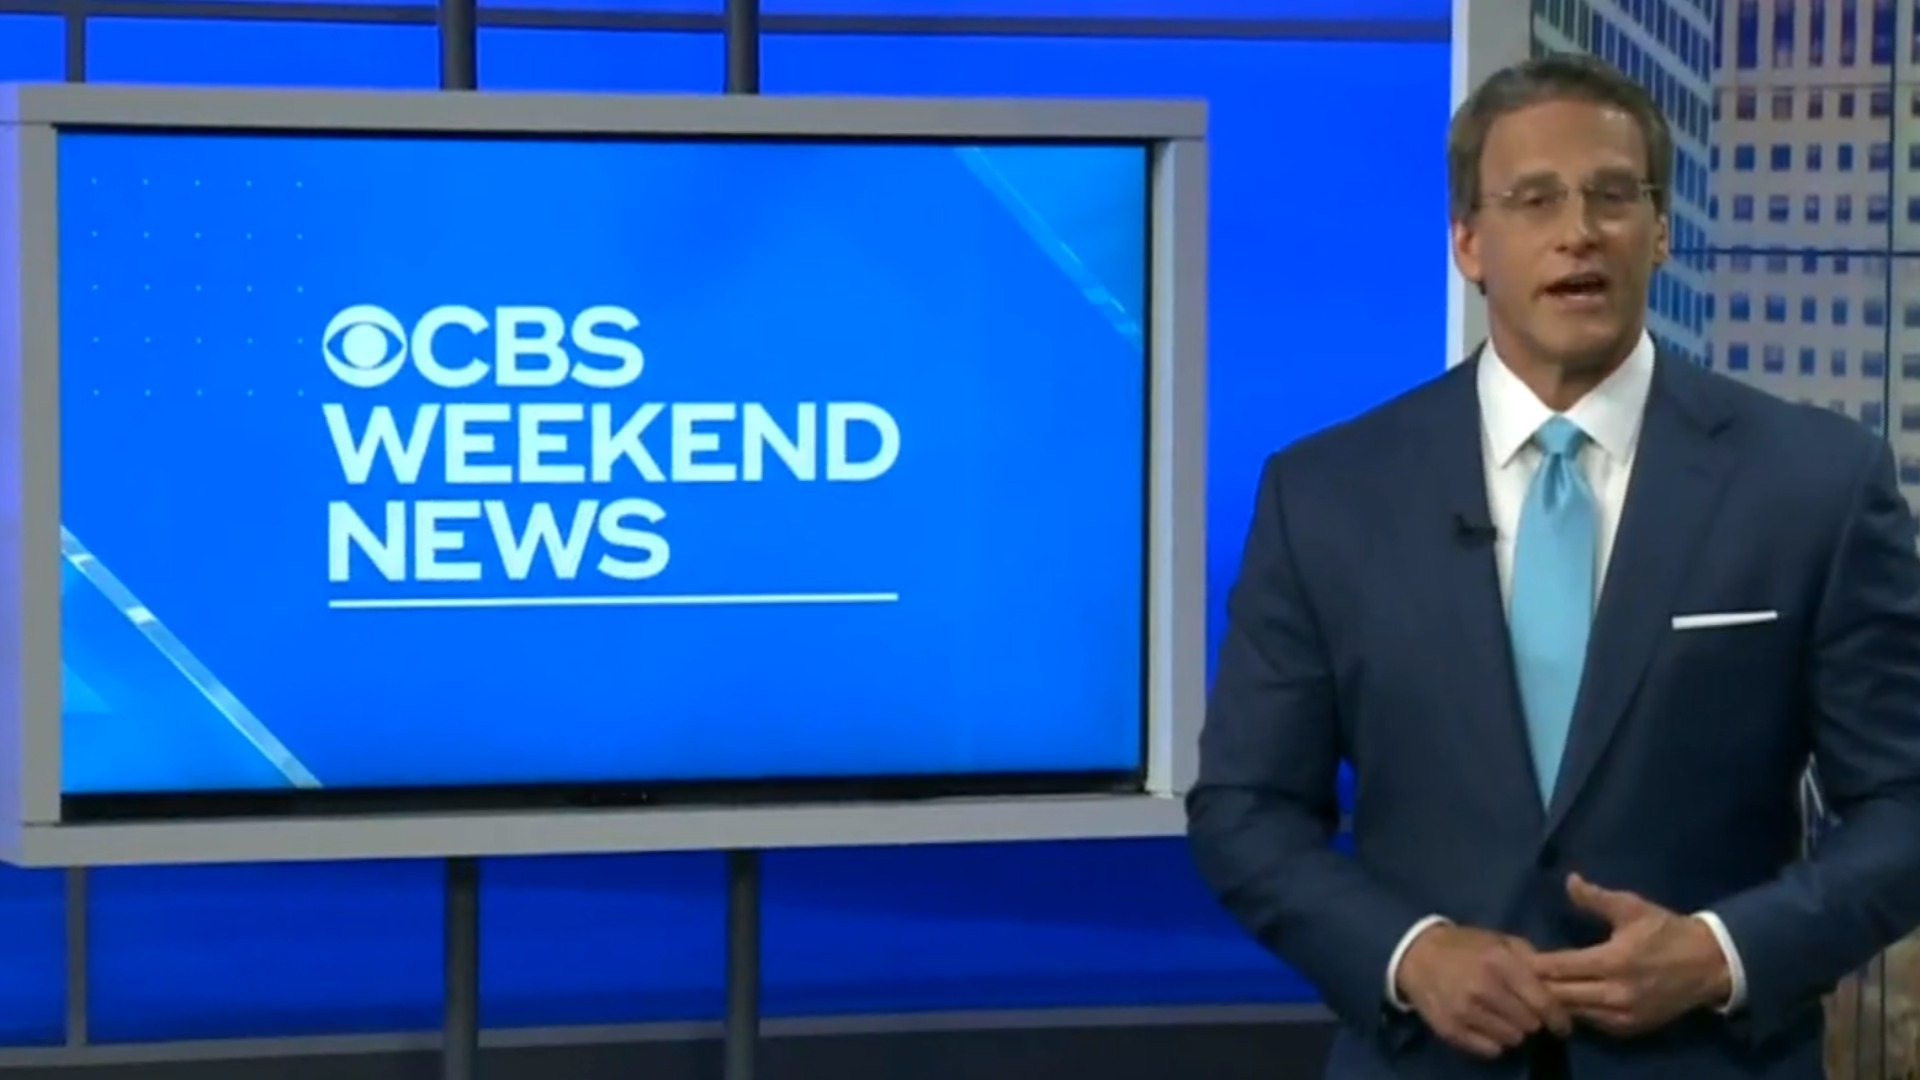 Watch CBS Evening News How Weekend News stayed afloat during the